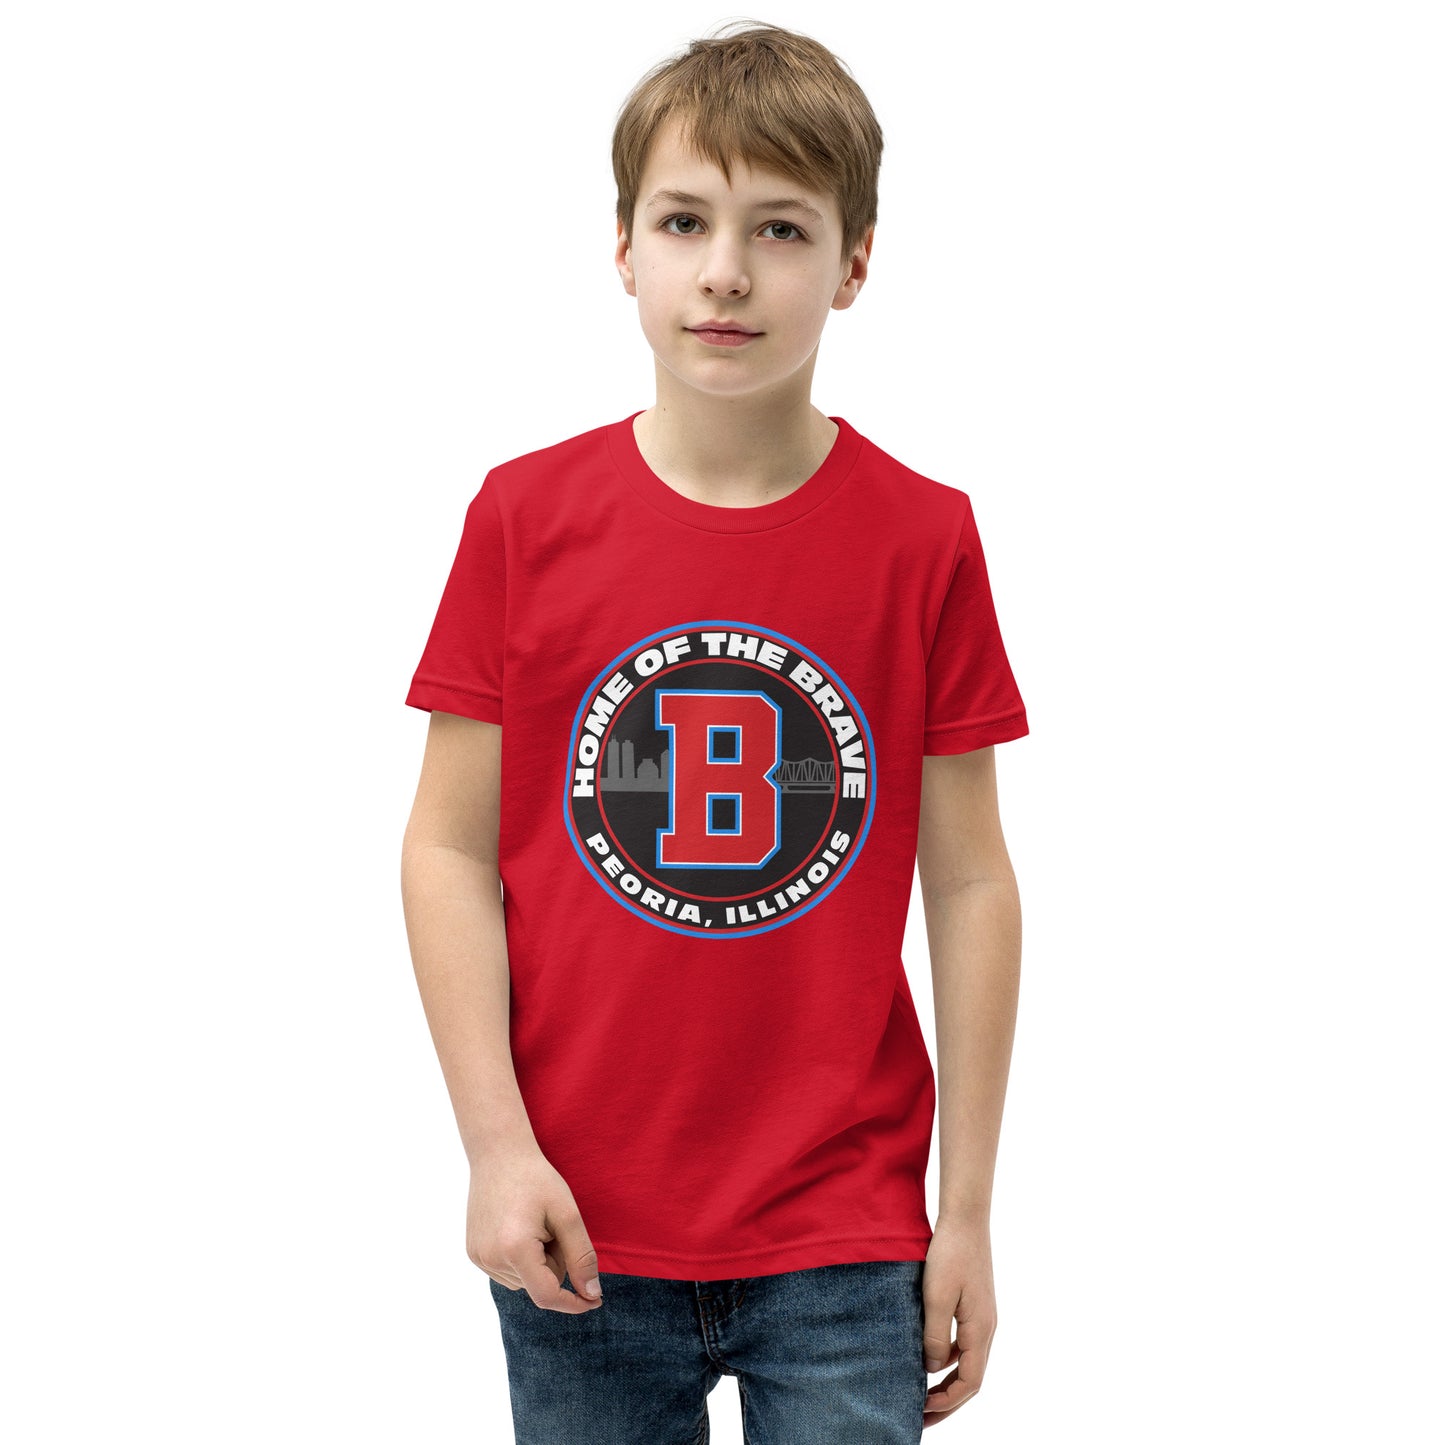 Home of the Brave Kids T-Shirt